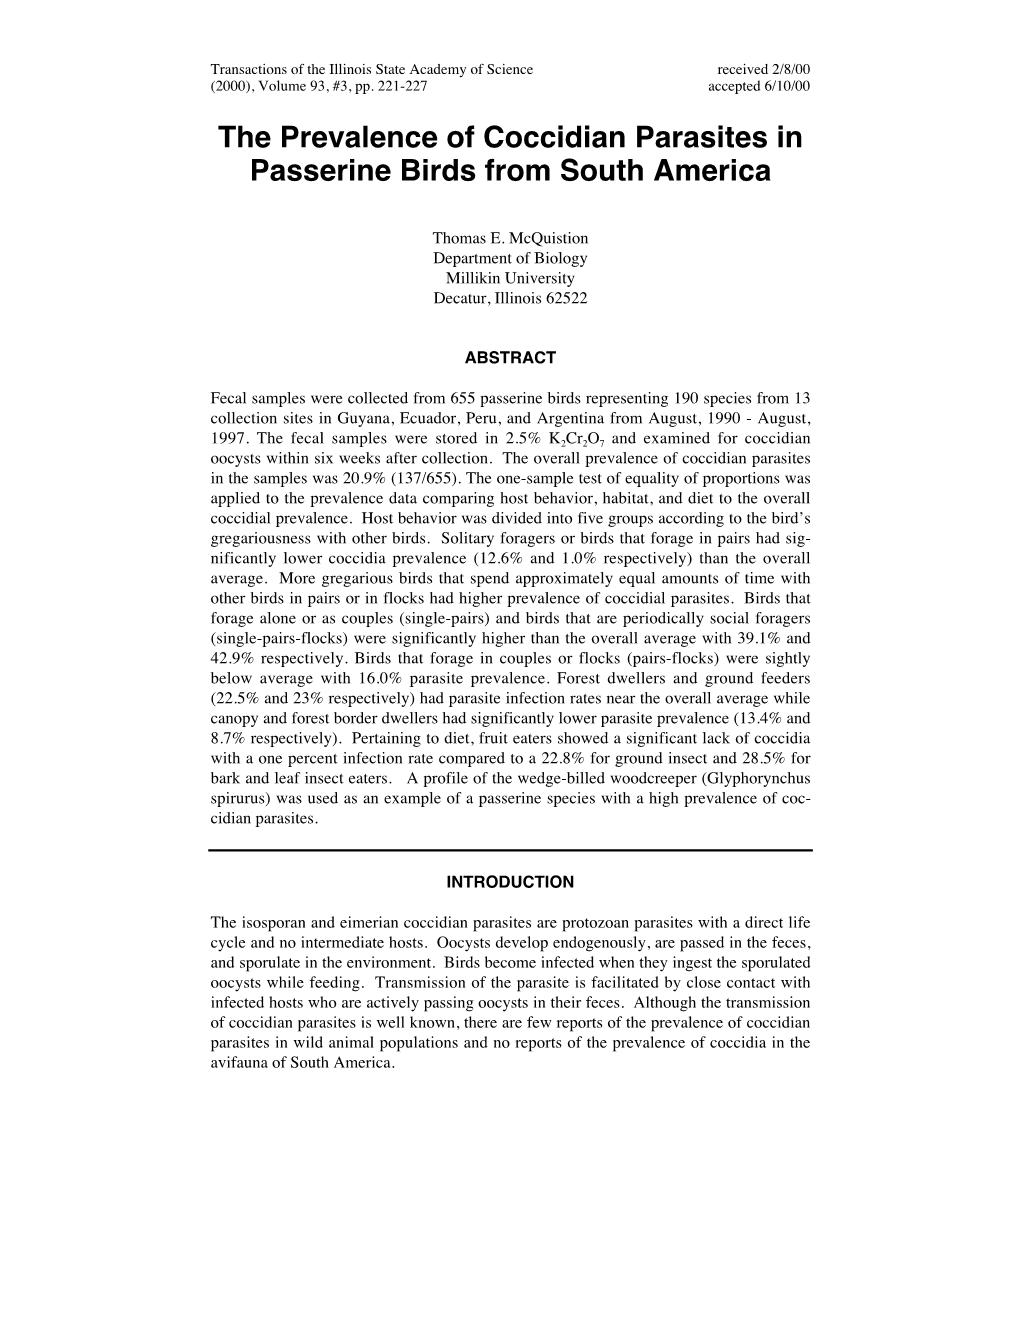 The Prevalence of Coccidian Parasites in Passerine Birds from South America